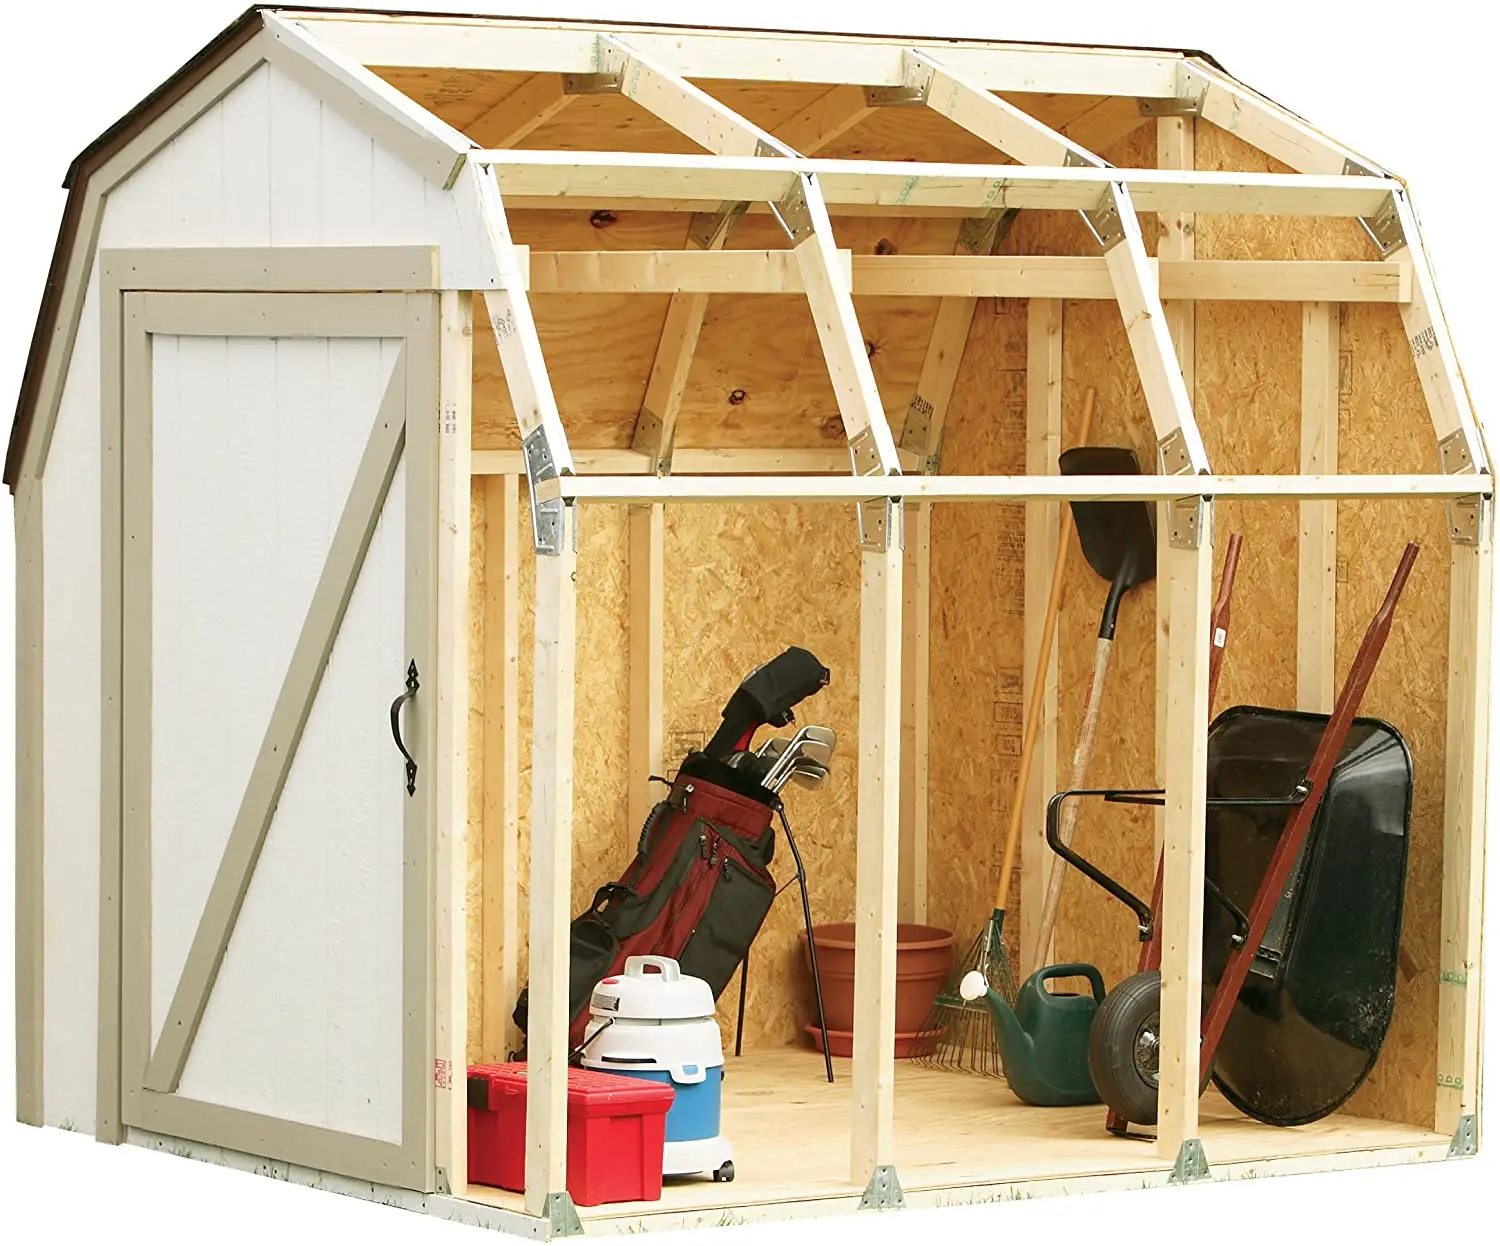 Details about   Custom Storage Shed Kit with Peak Roof DIY with Brackets Plans 